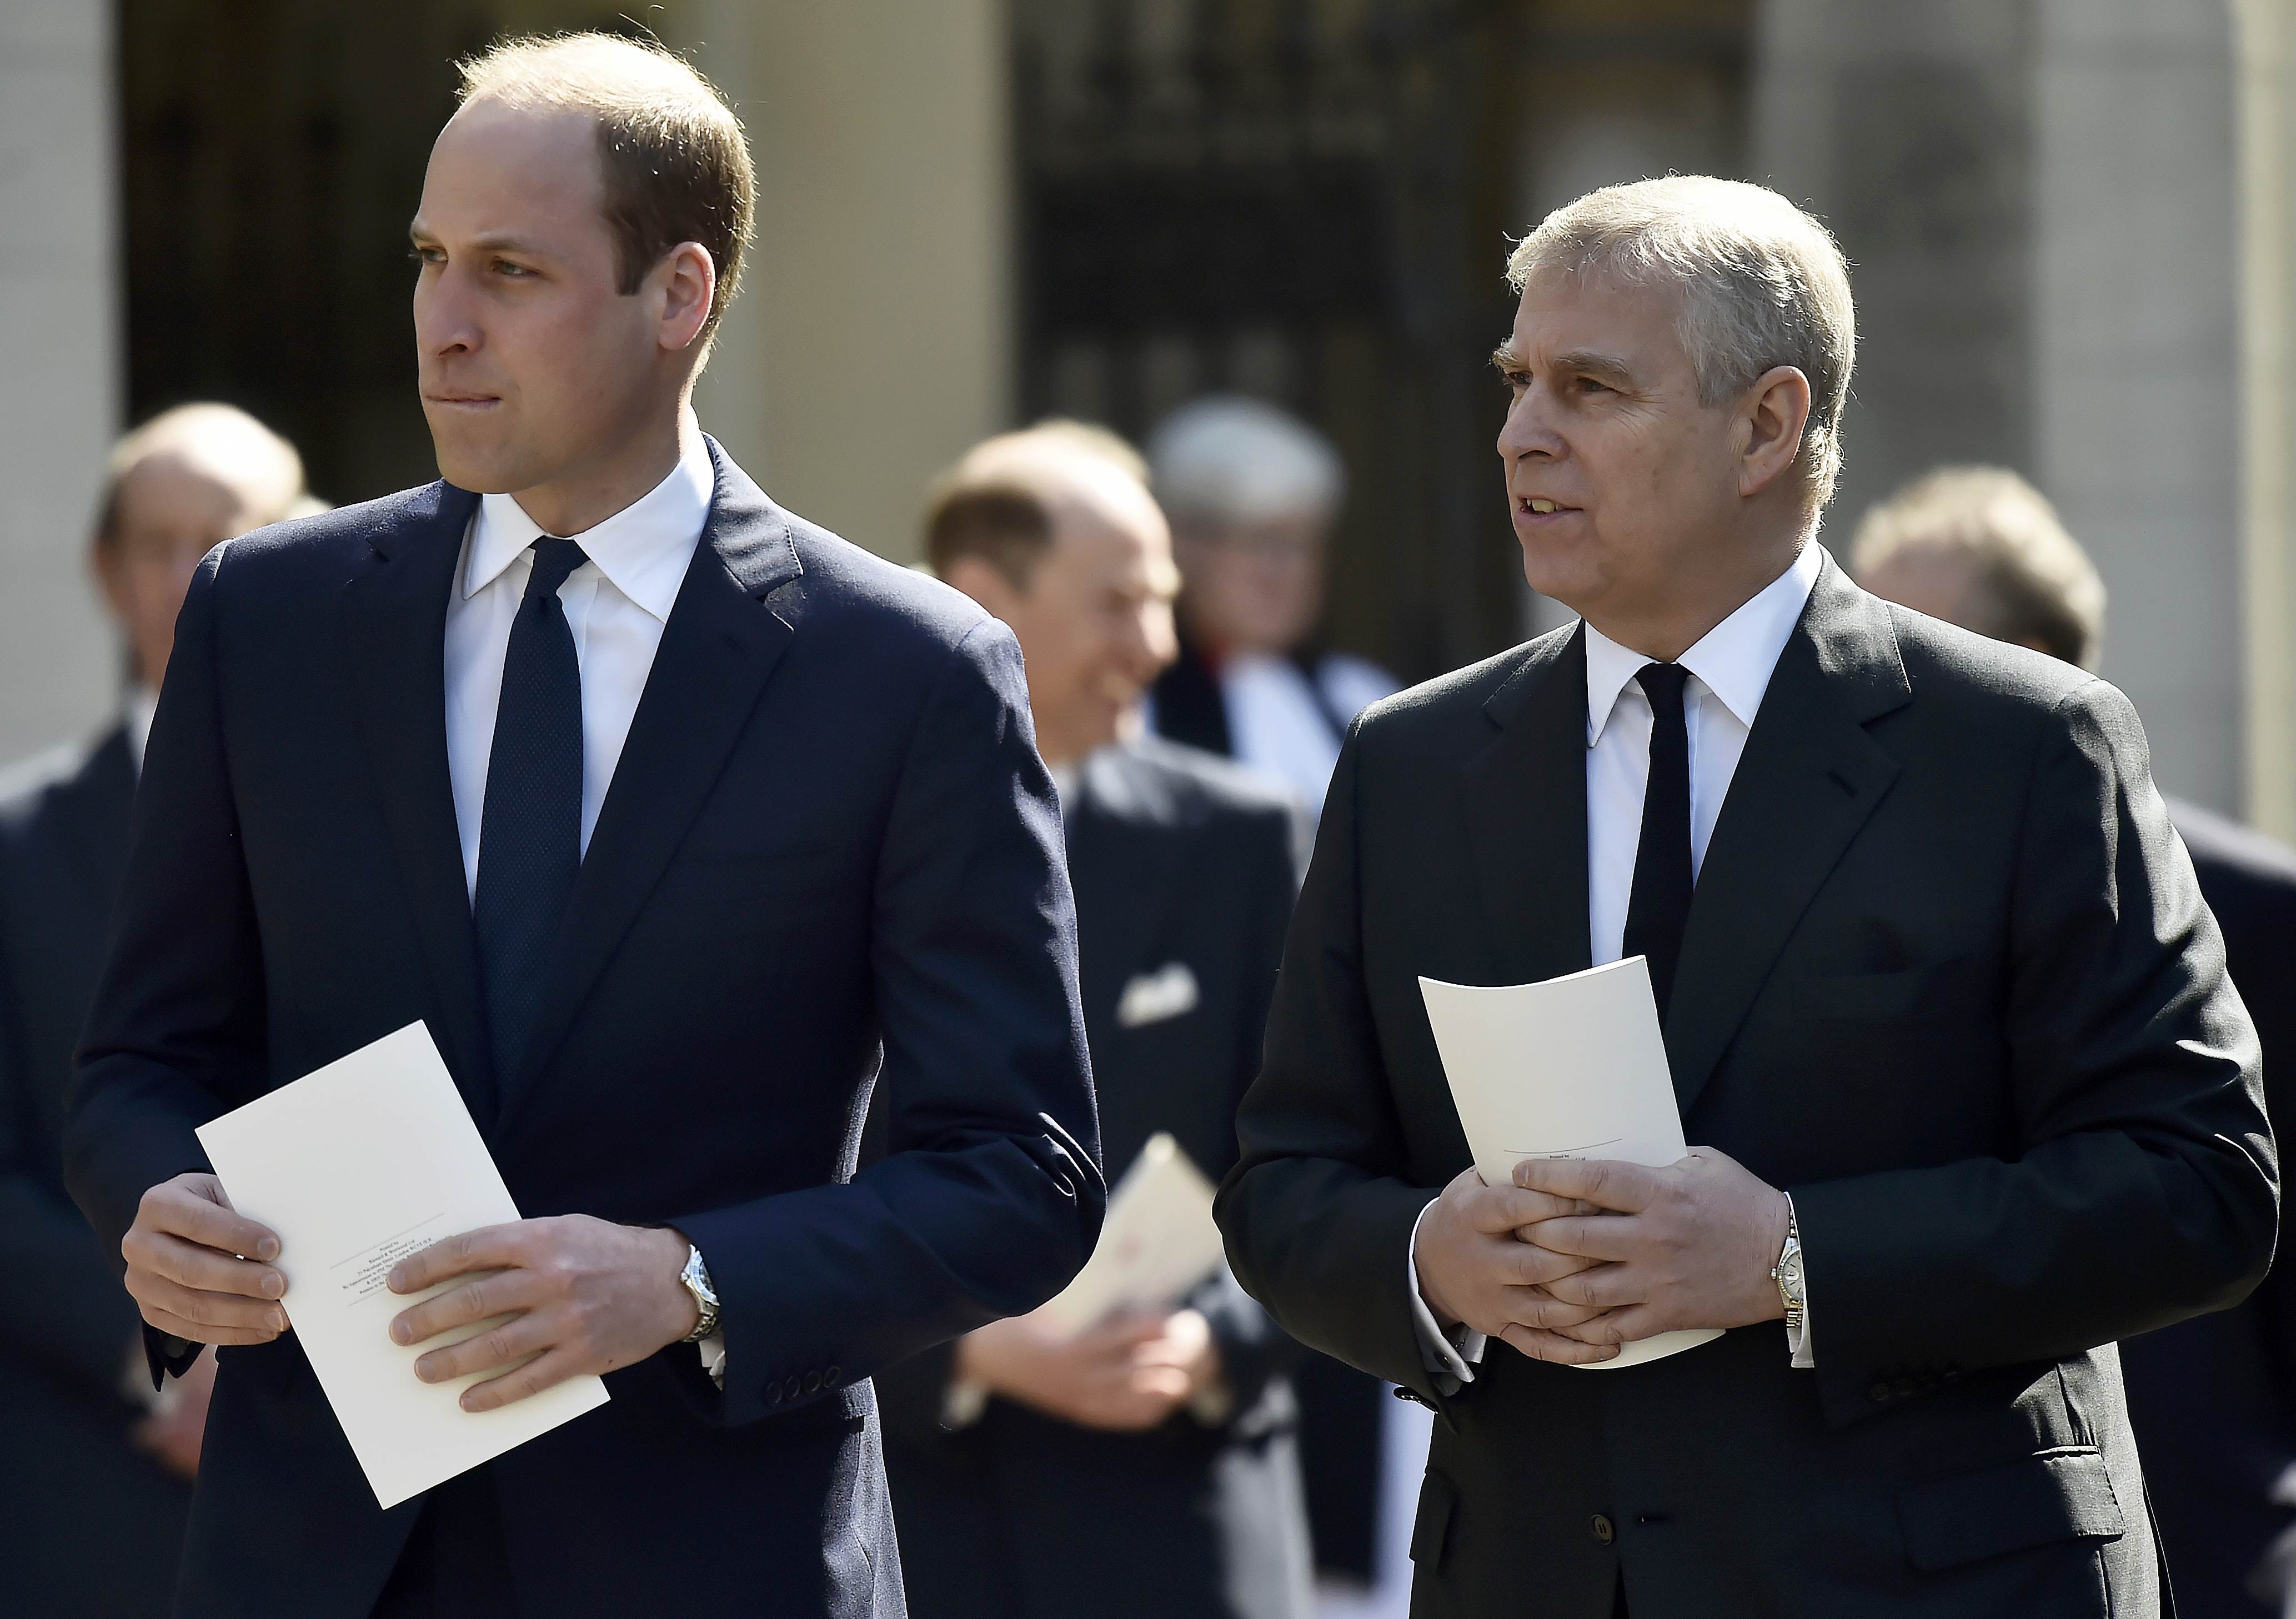 Prince William standing next to Prince Andrew who he reportedly wants to “banish” from the royal family